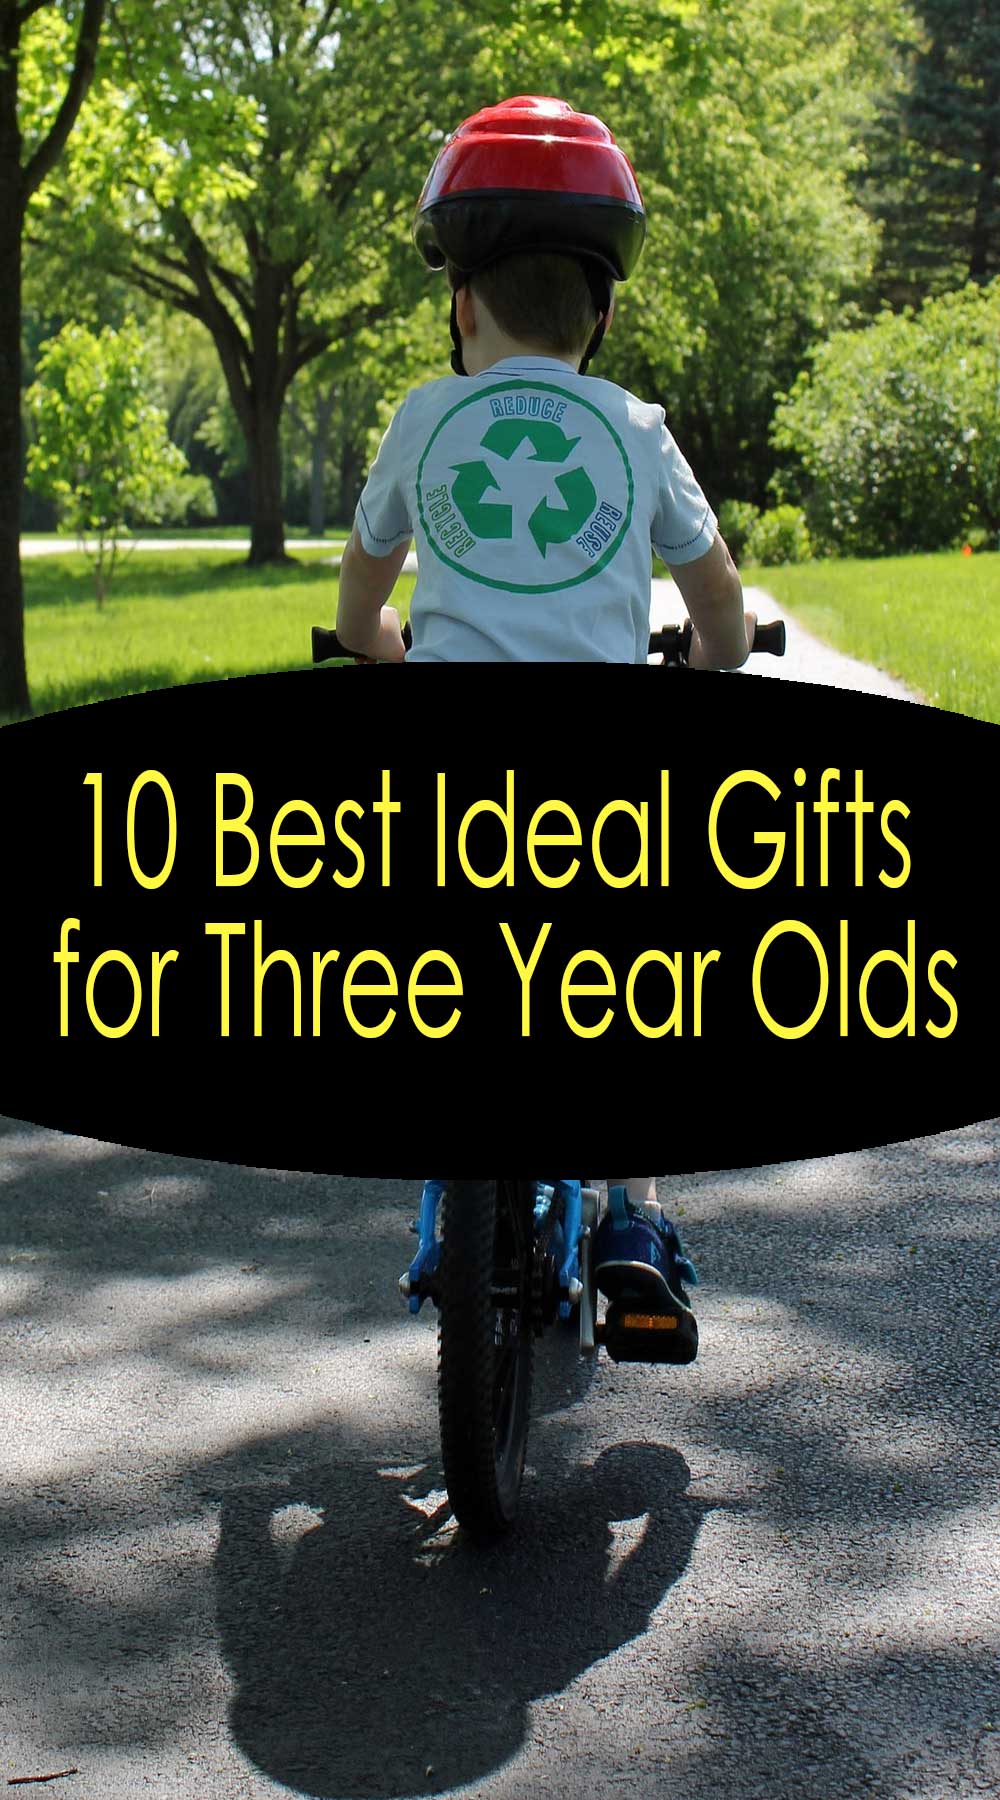 10 Best Ideal Gifts for Three Year Olds